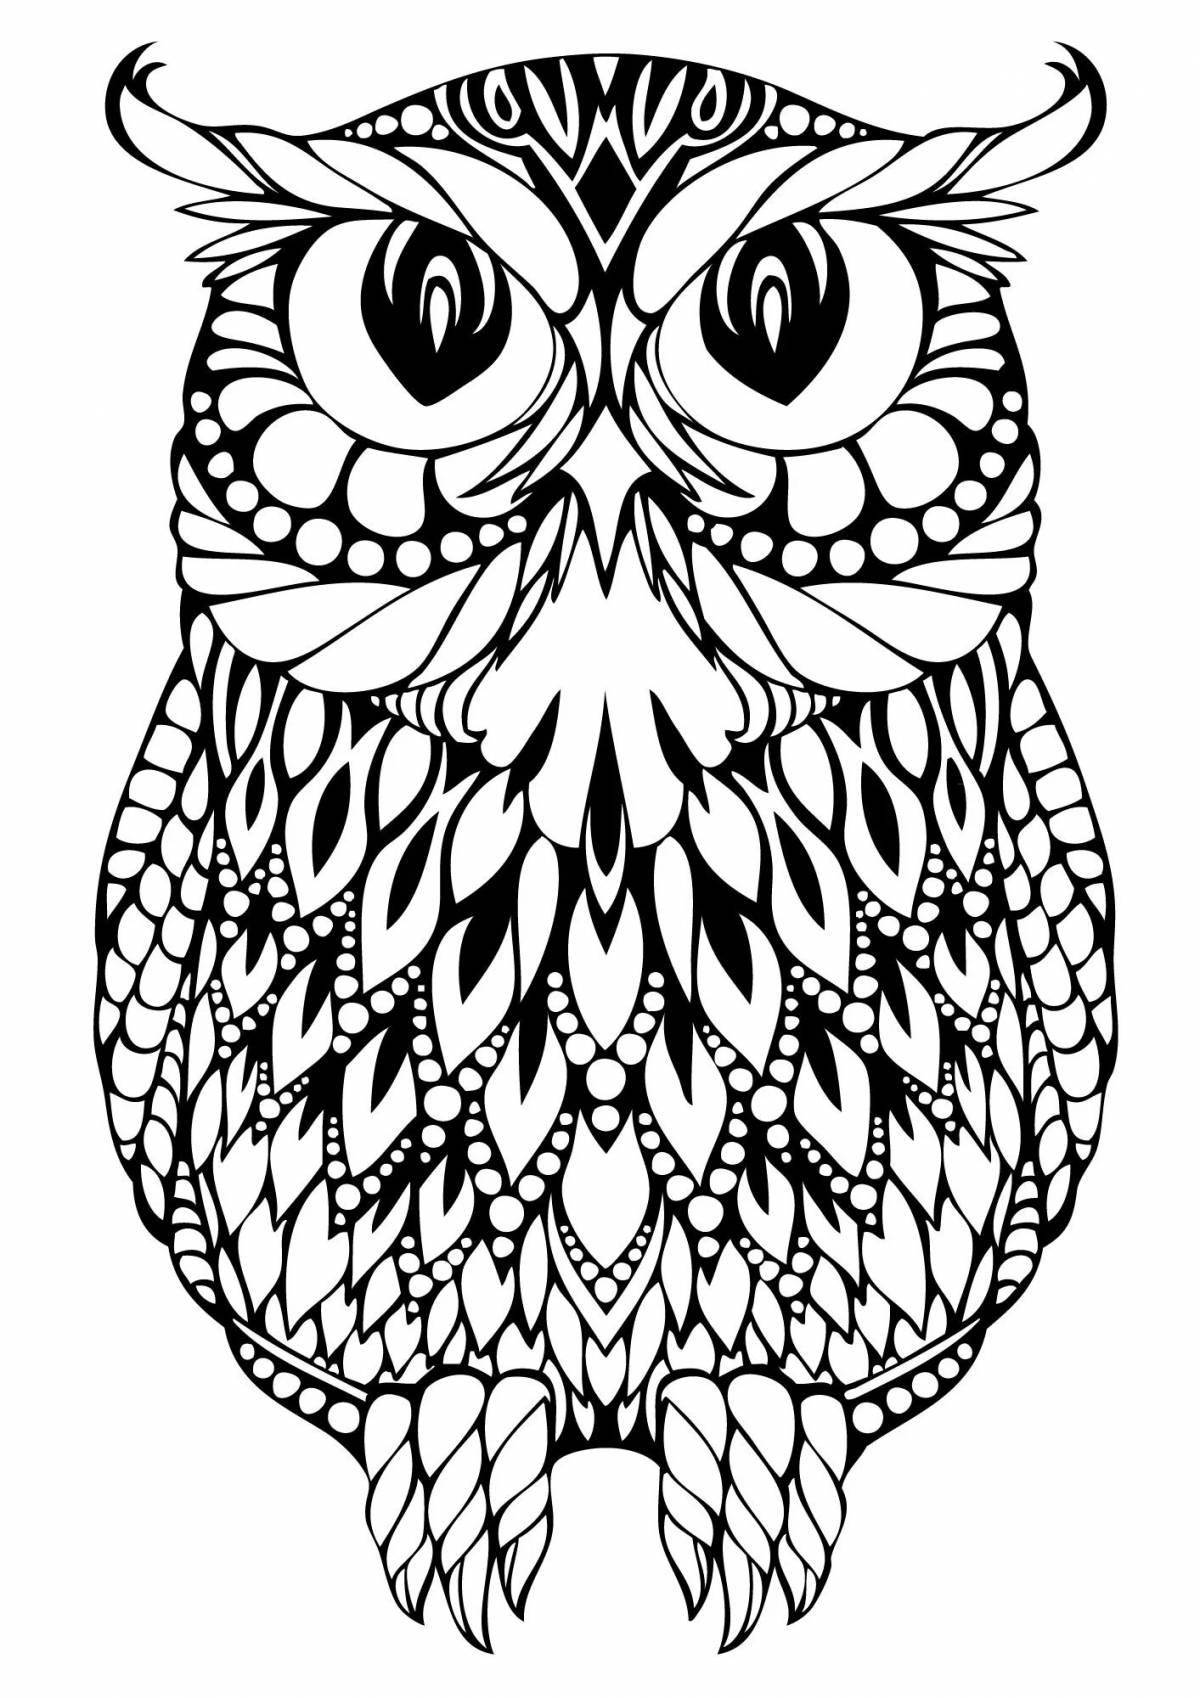 Exquisite coloring drawing of an owl